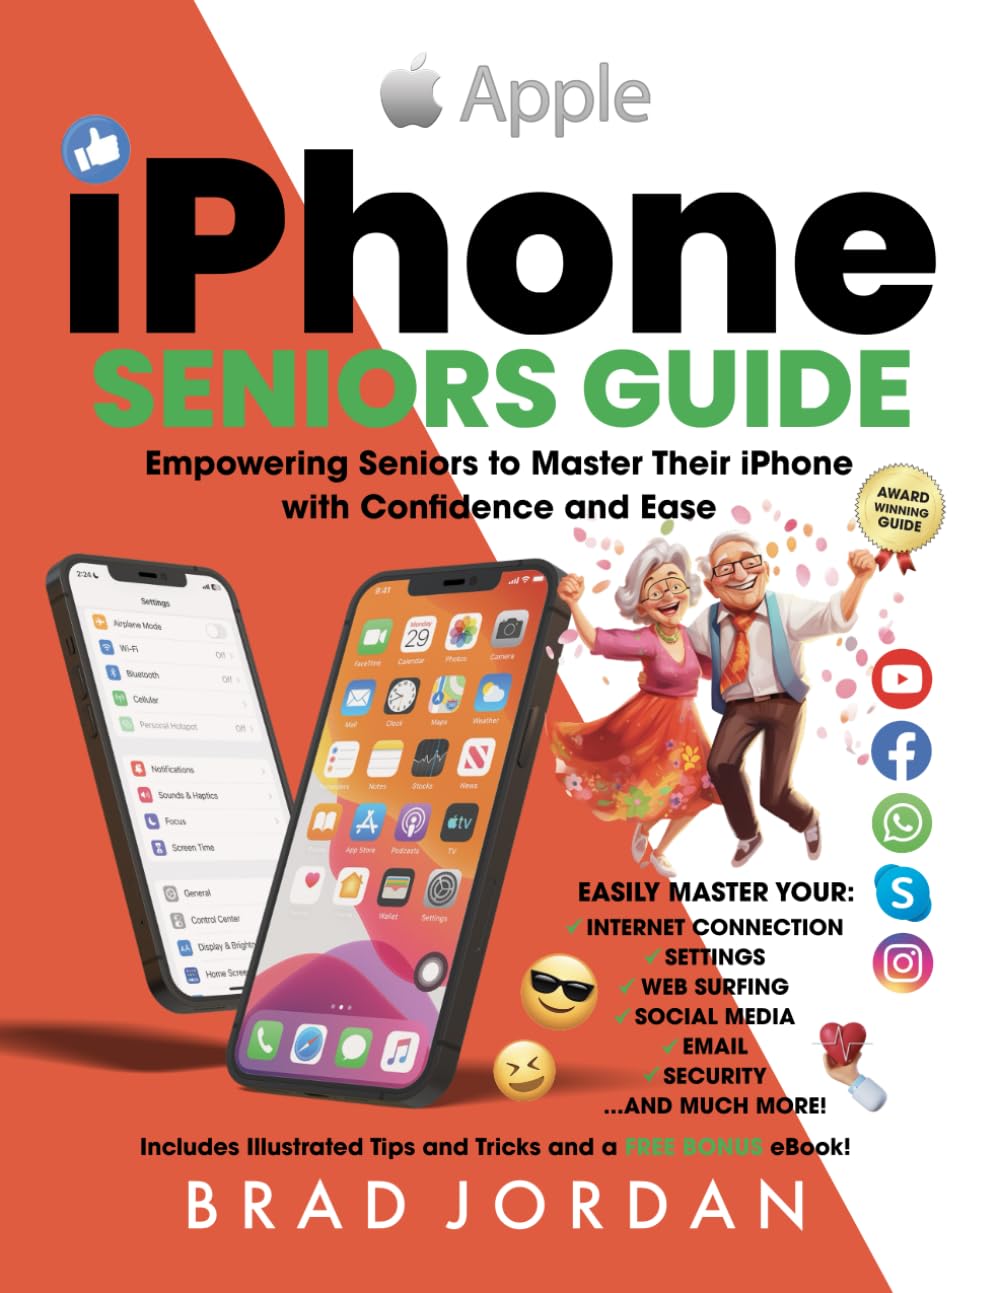 iPHONE SENIORS GUIDE: Empowering Seniors to Master Their iPhone with Ease and Confidence